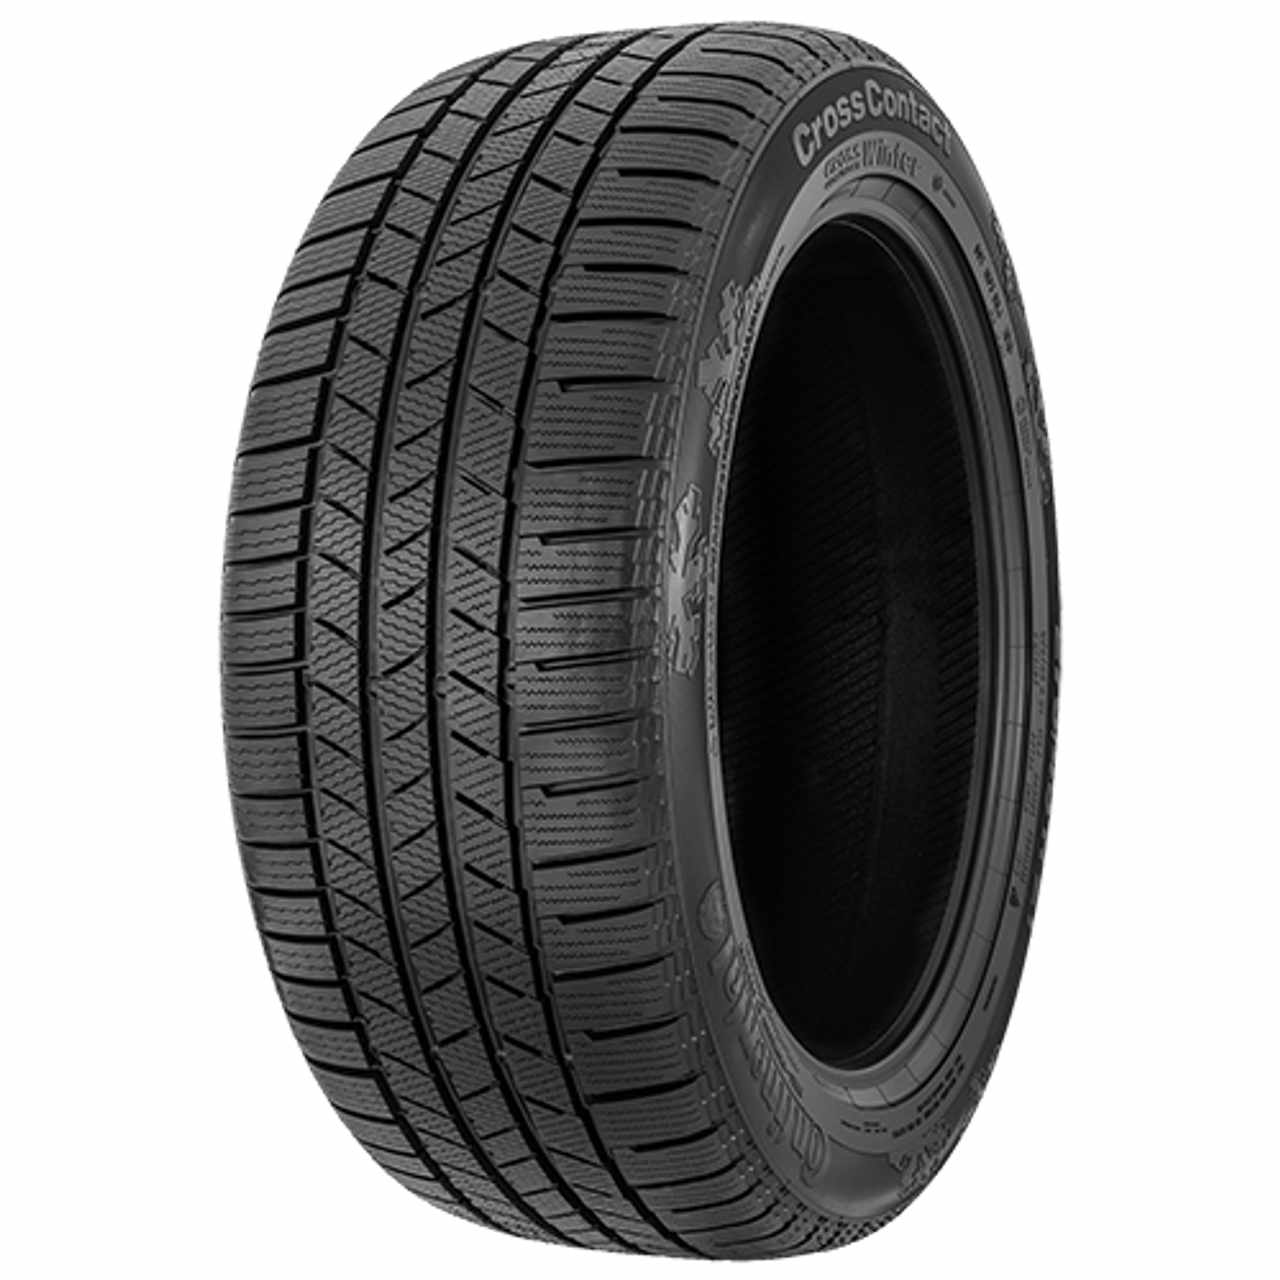 CONTINENTAL CONTICROSSCONTACT WINTER 205/70R15 96T